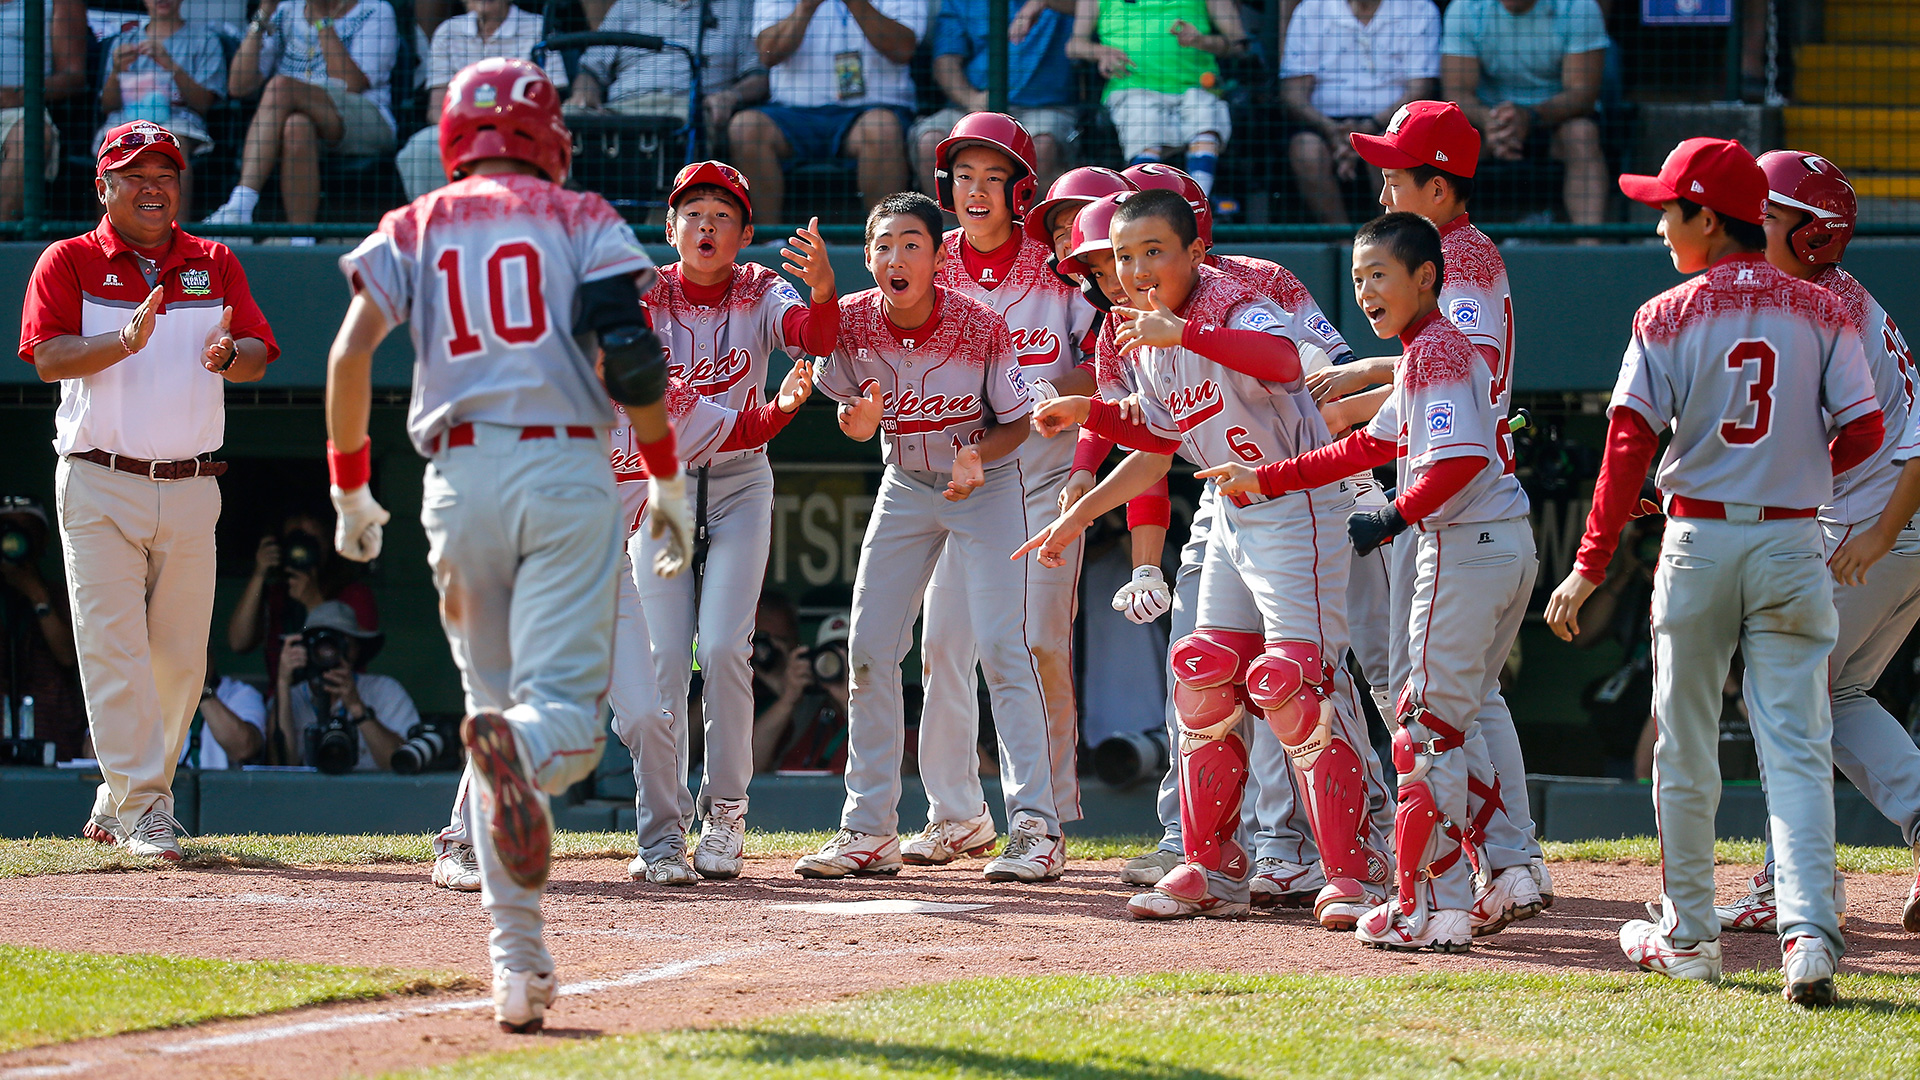 Little League World Series: Check out the action from Williamsport.